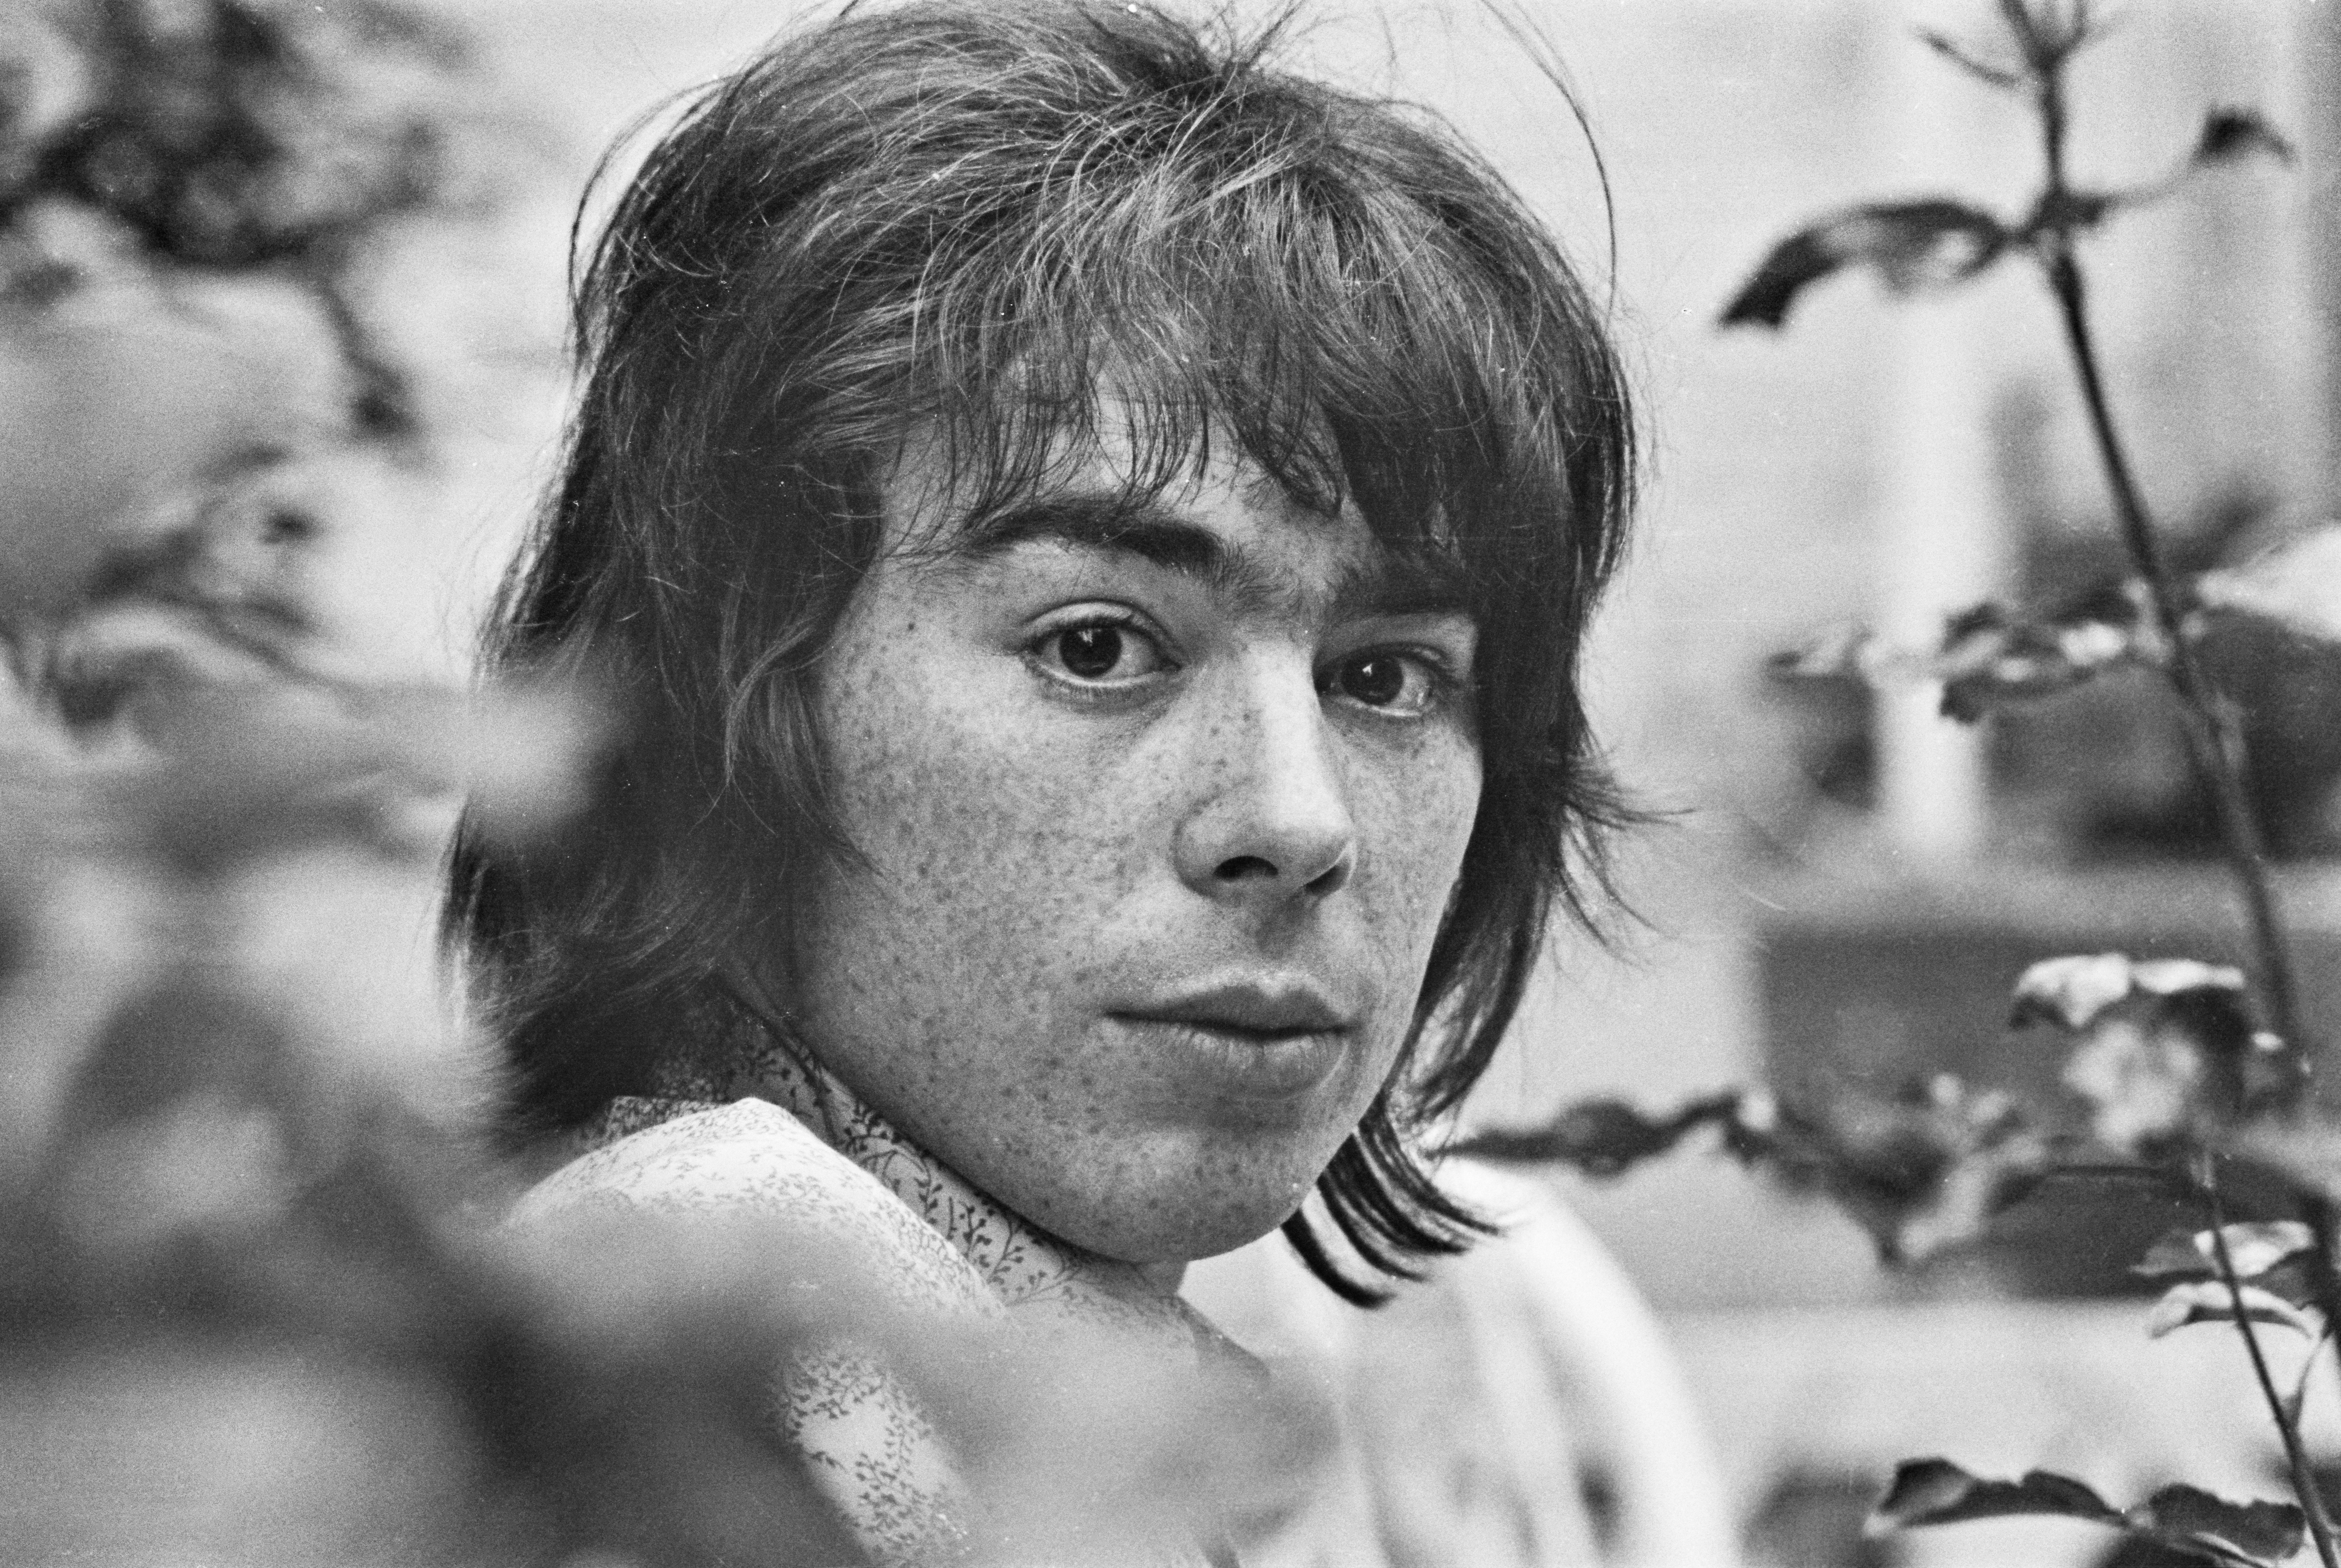 Andrew Lloyd Webber in August 1972 | Source: Getty Images